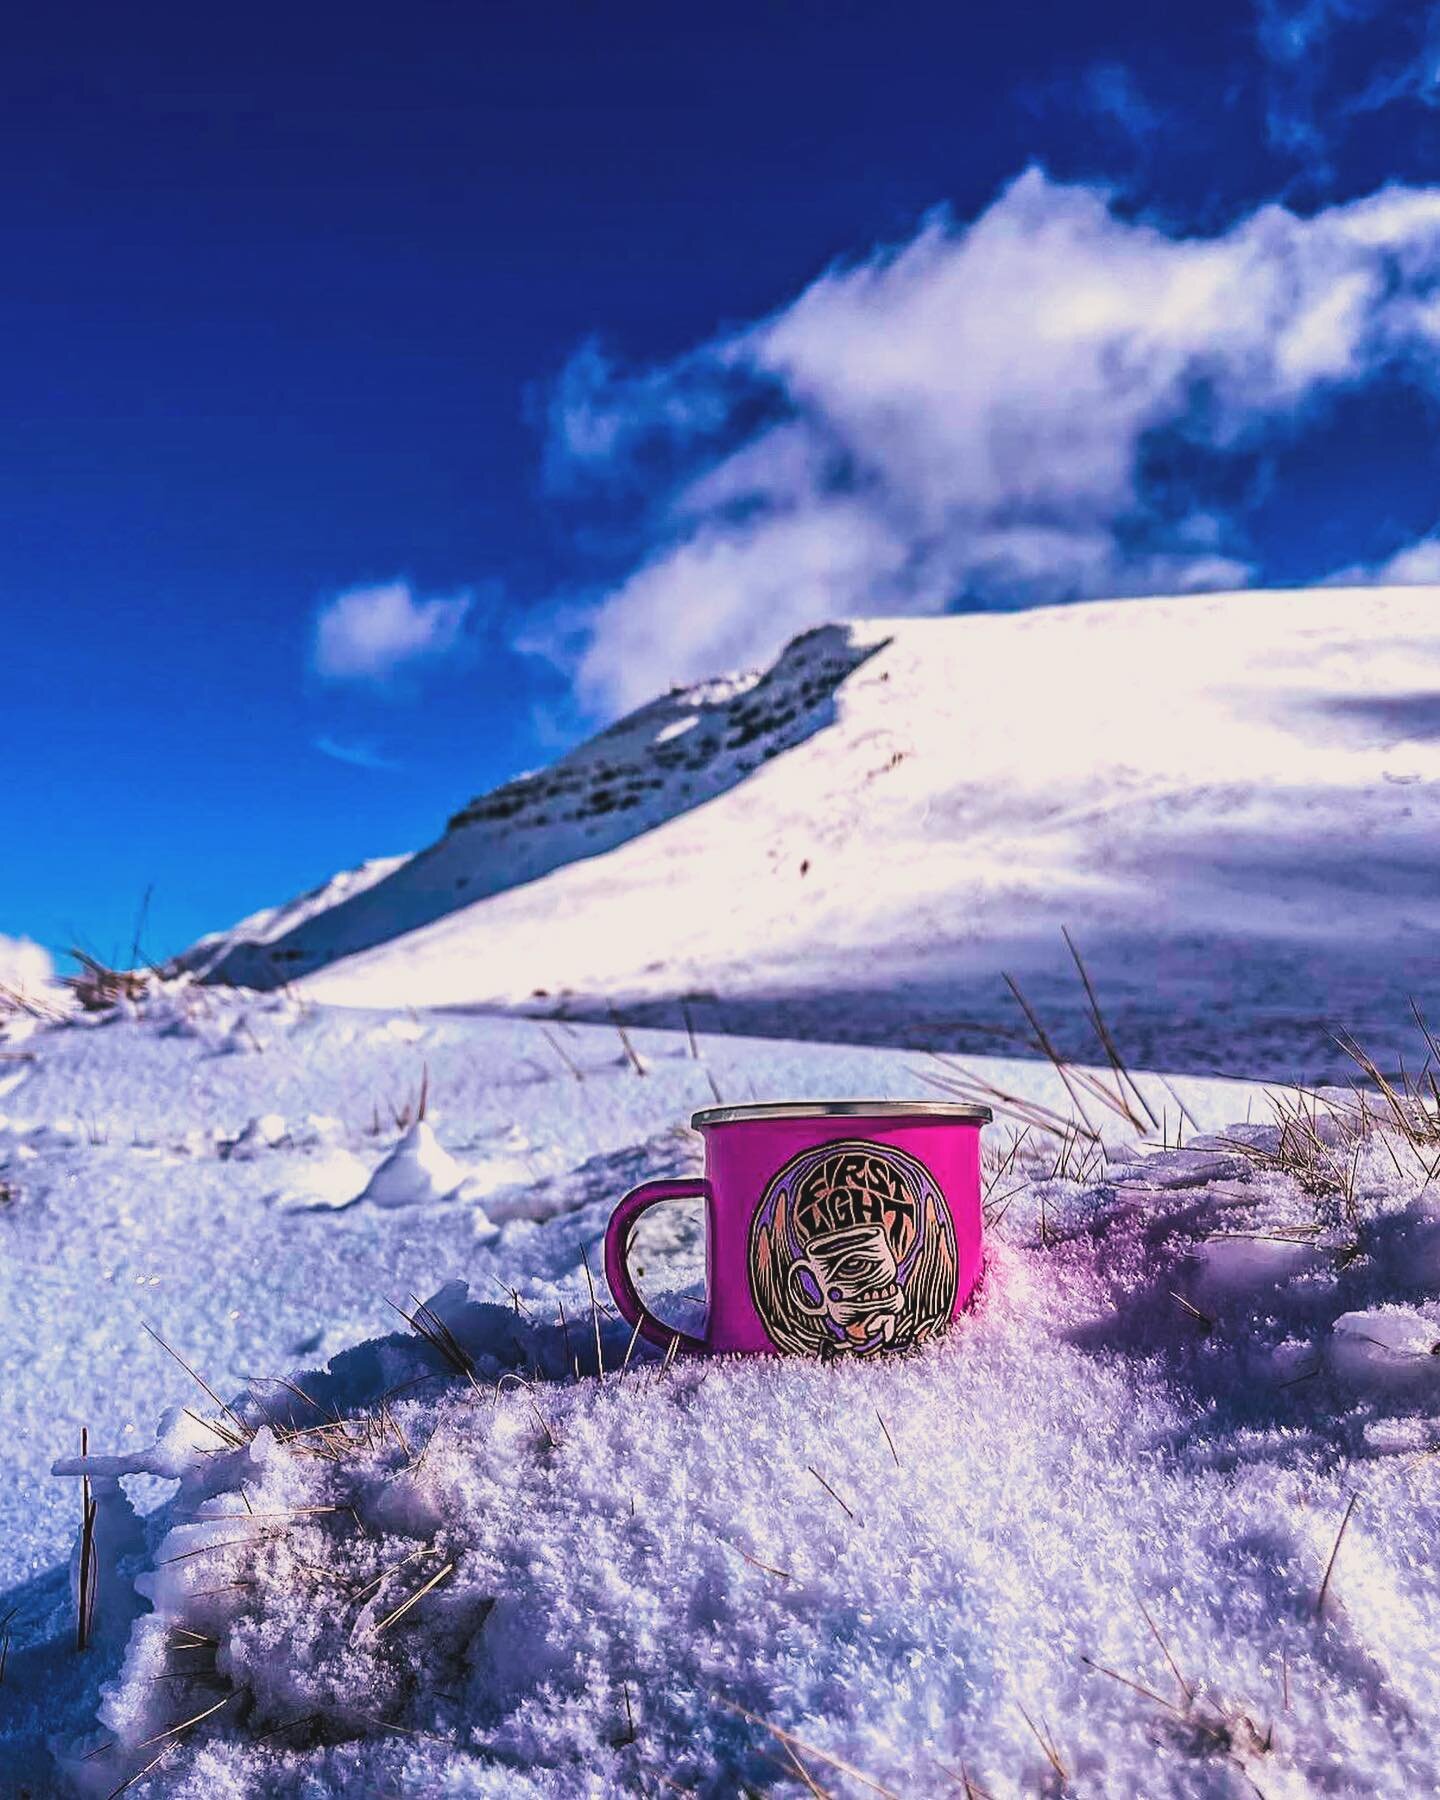 As dawn lands on the rugged peaks, the smell of freshly brewed coffee mingles with crisp air, igniting the soul with adventure and warmth. First Light Coffee is made with the mountains in mind. 

www.firstlightcoffee.co.uk

📸 : @tjbally